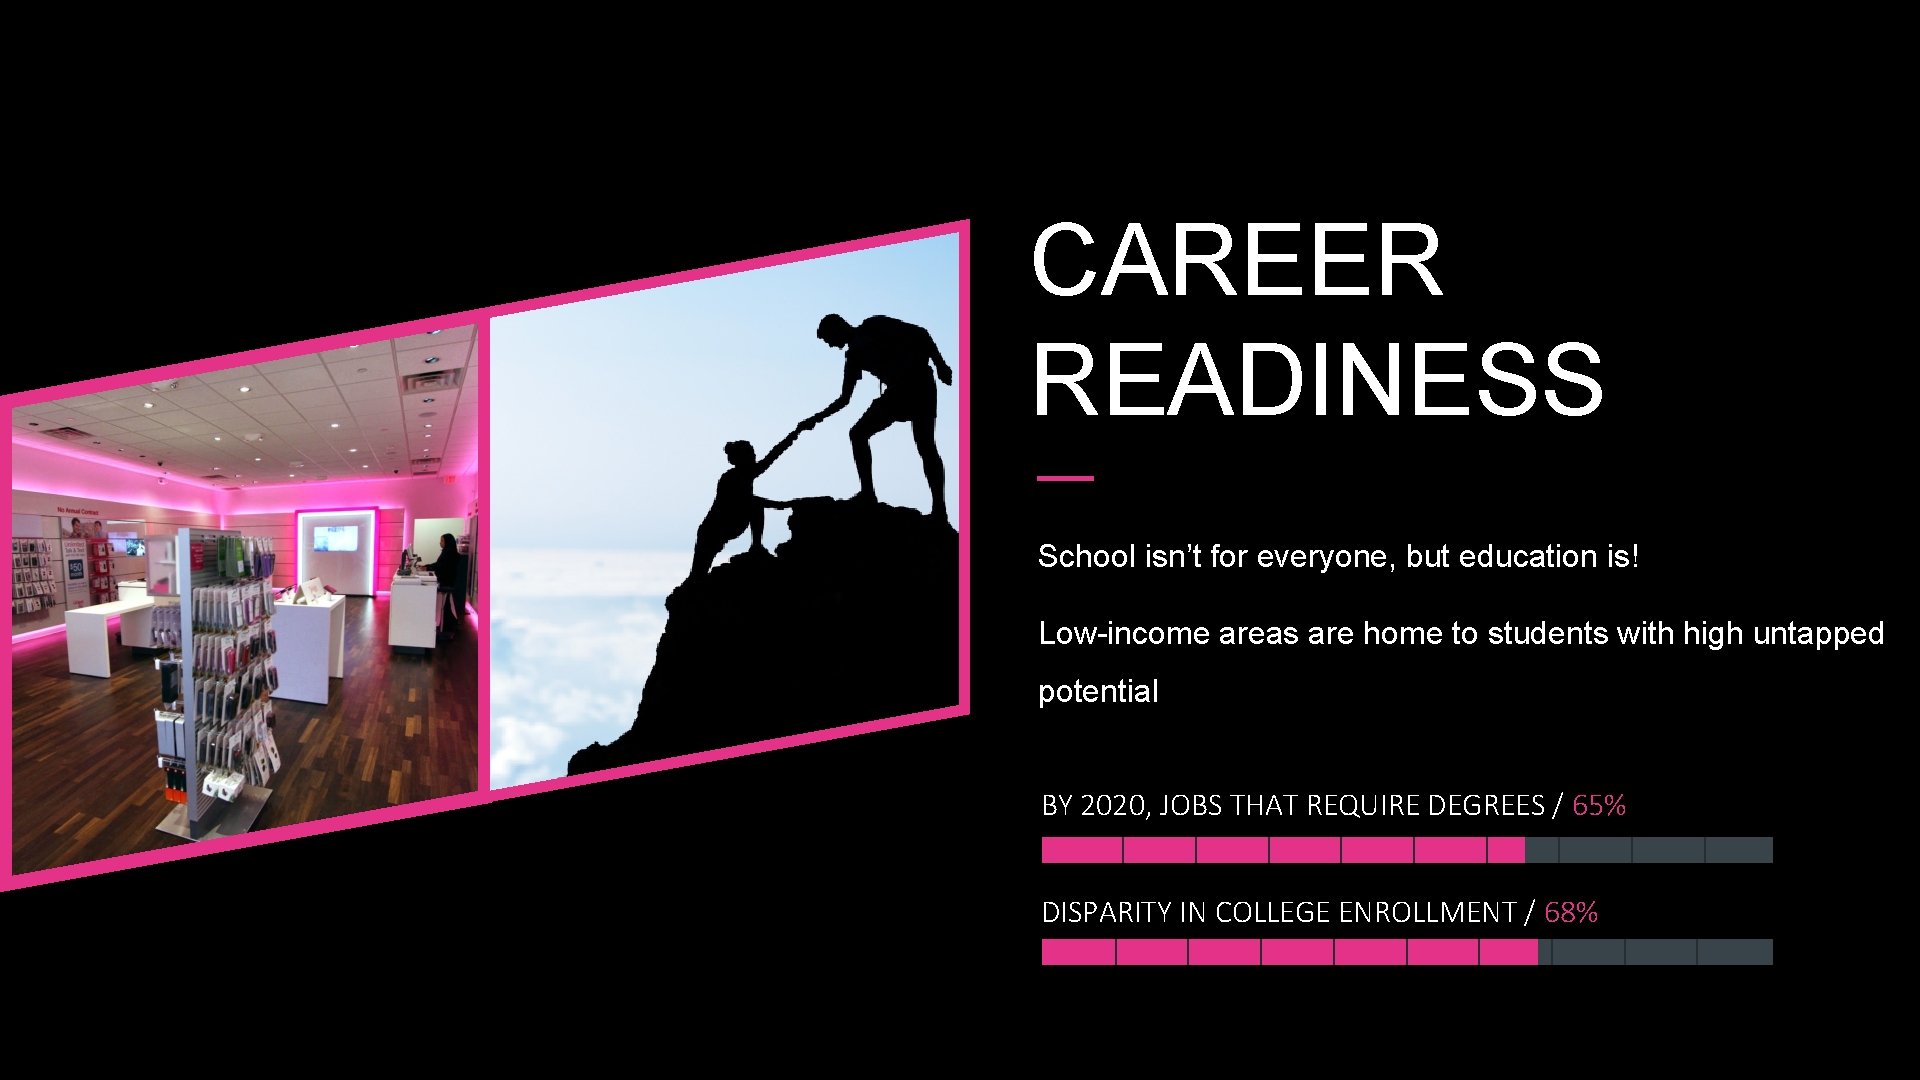 CAREER READINESS School isn’t for everyone, but education is! Low-income areas are home to